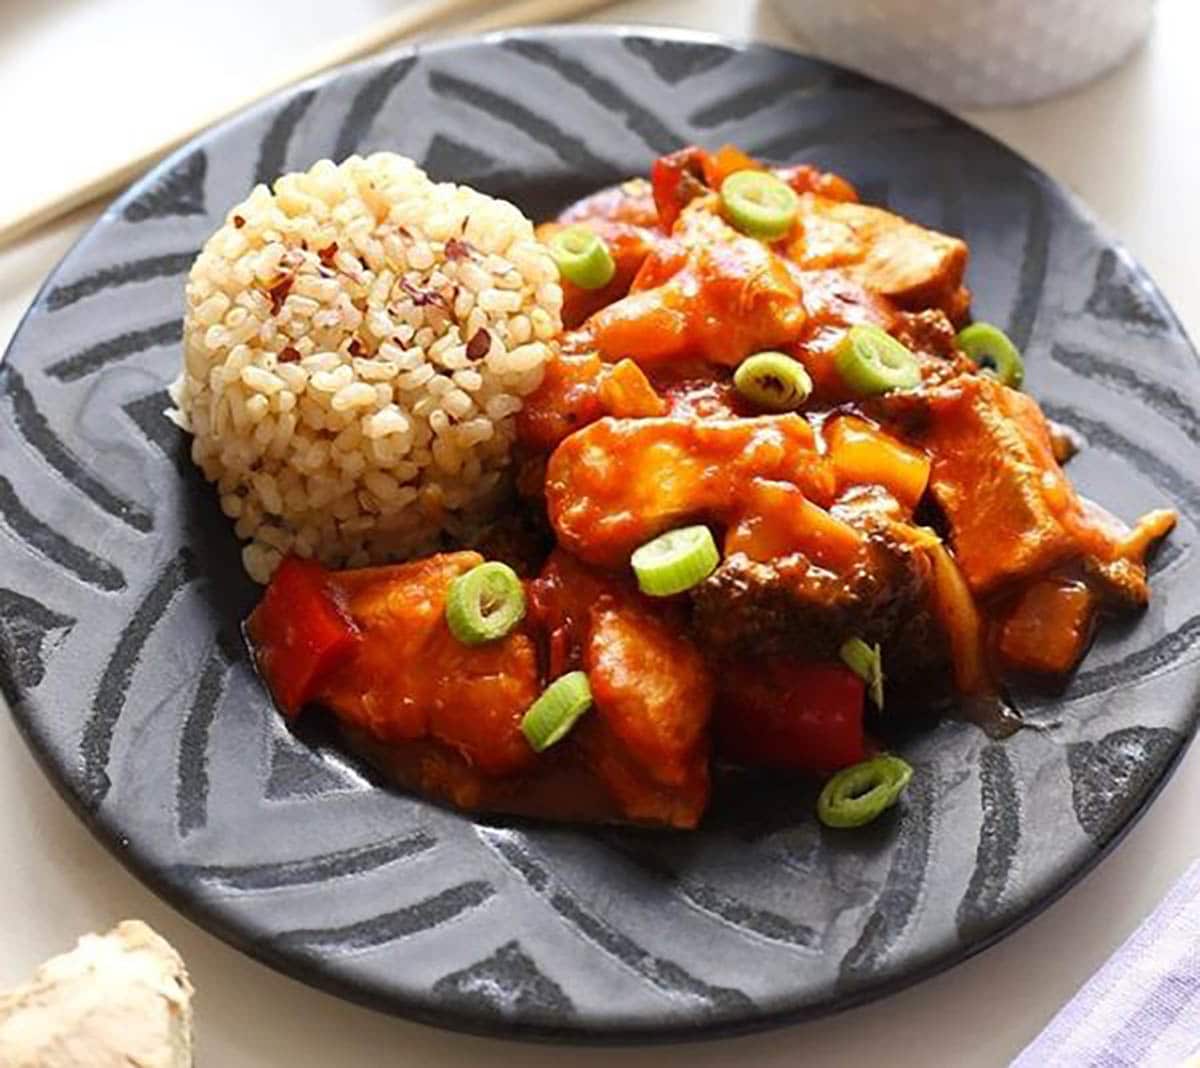 Slow-Cooker Sweet and Sour Chicken